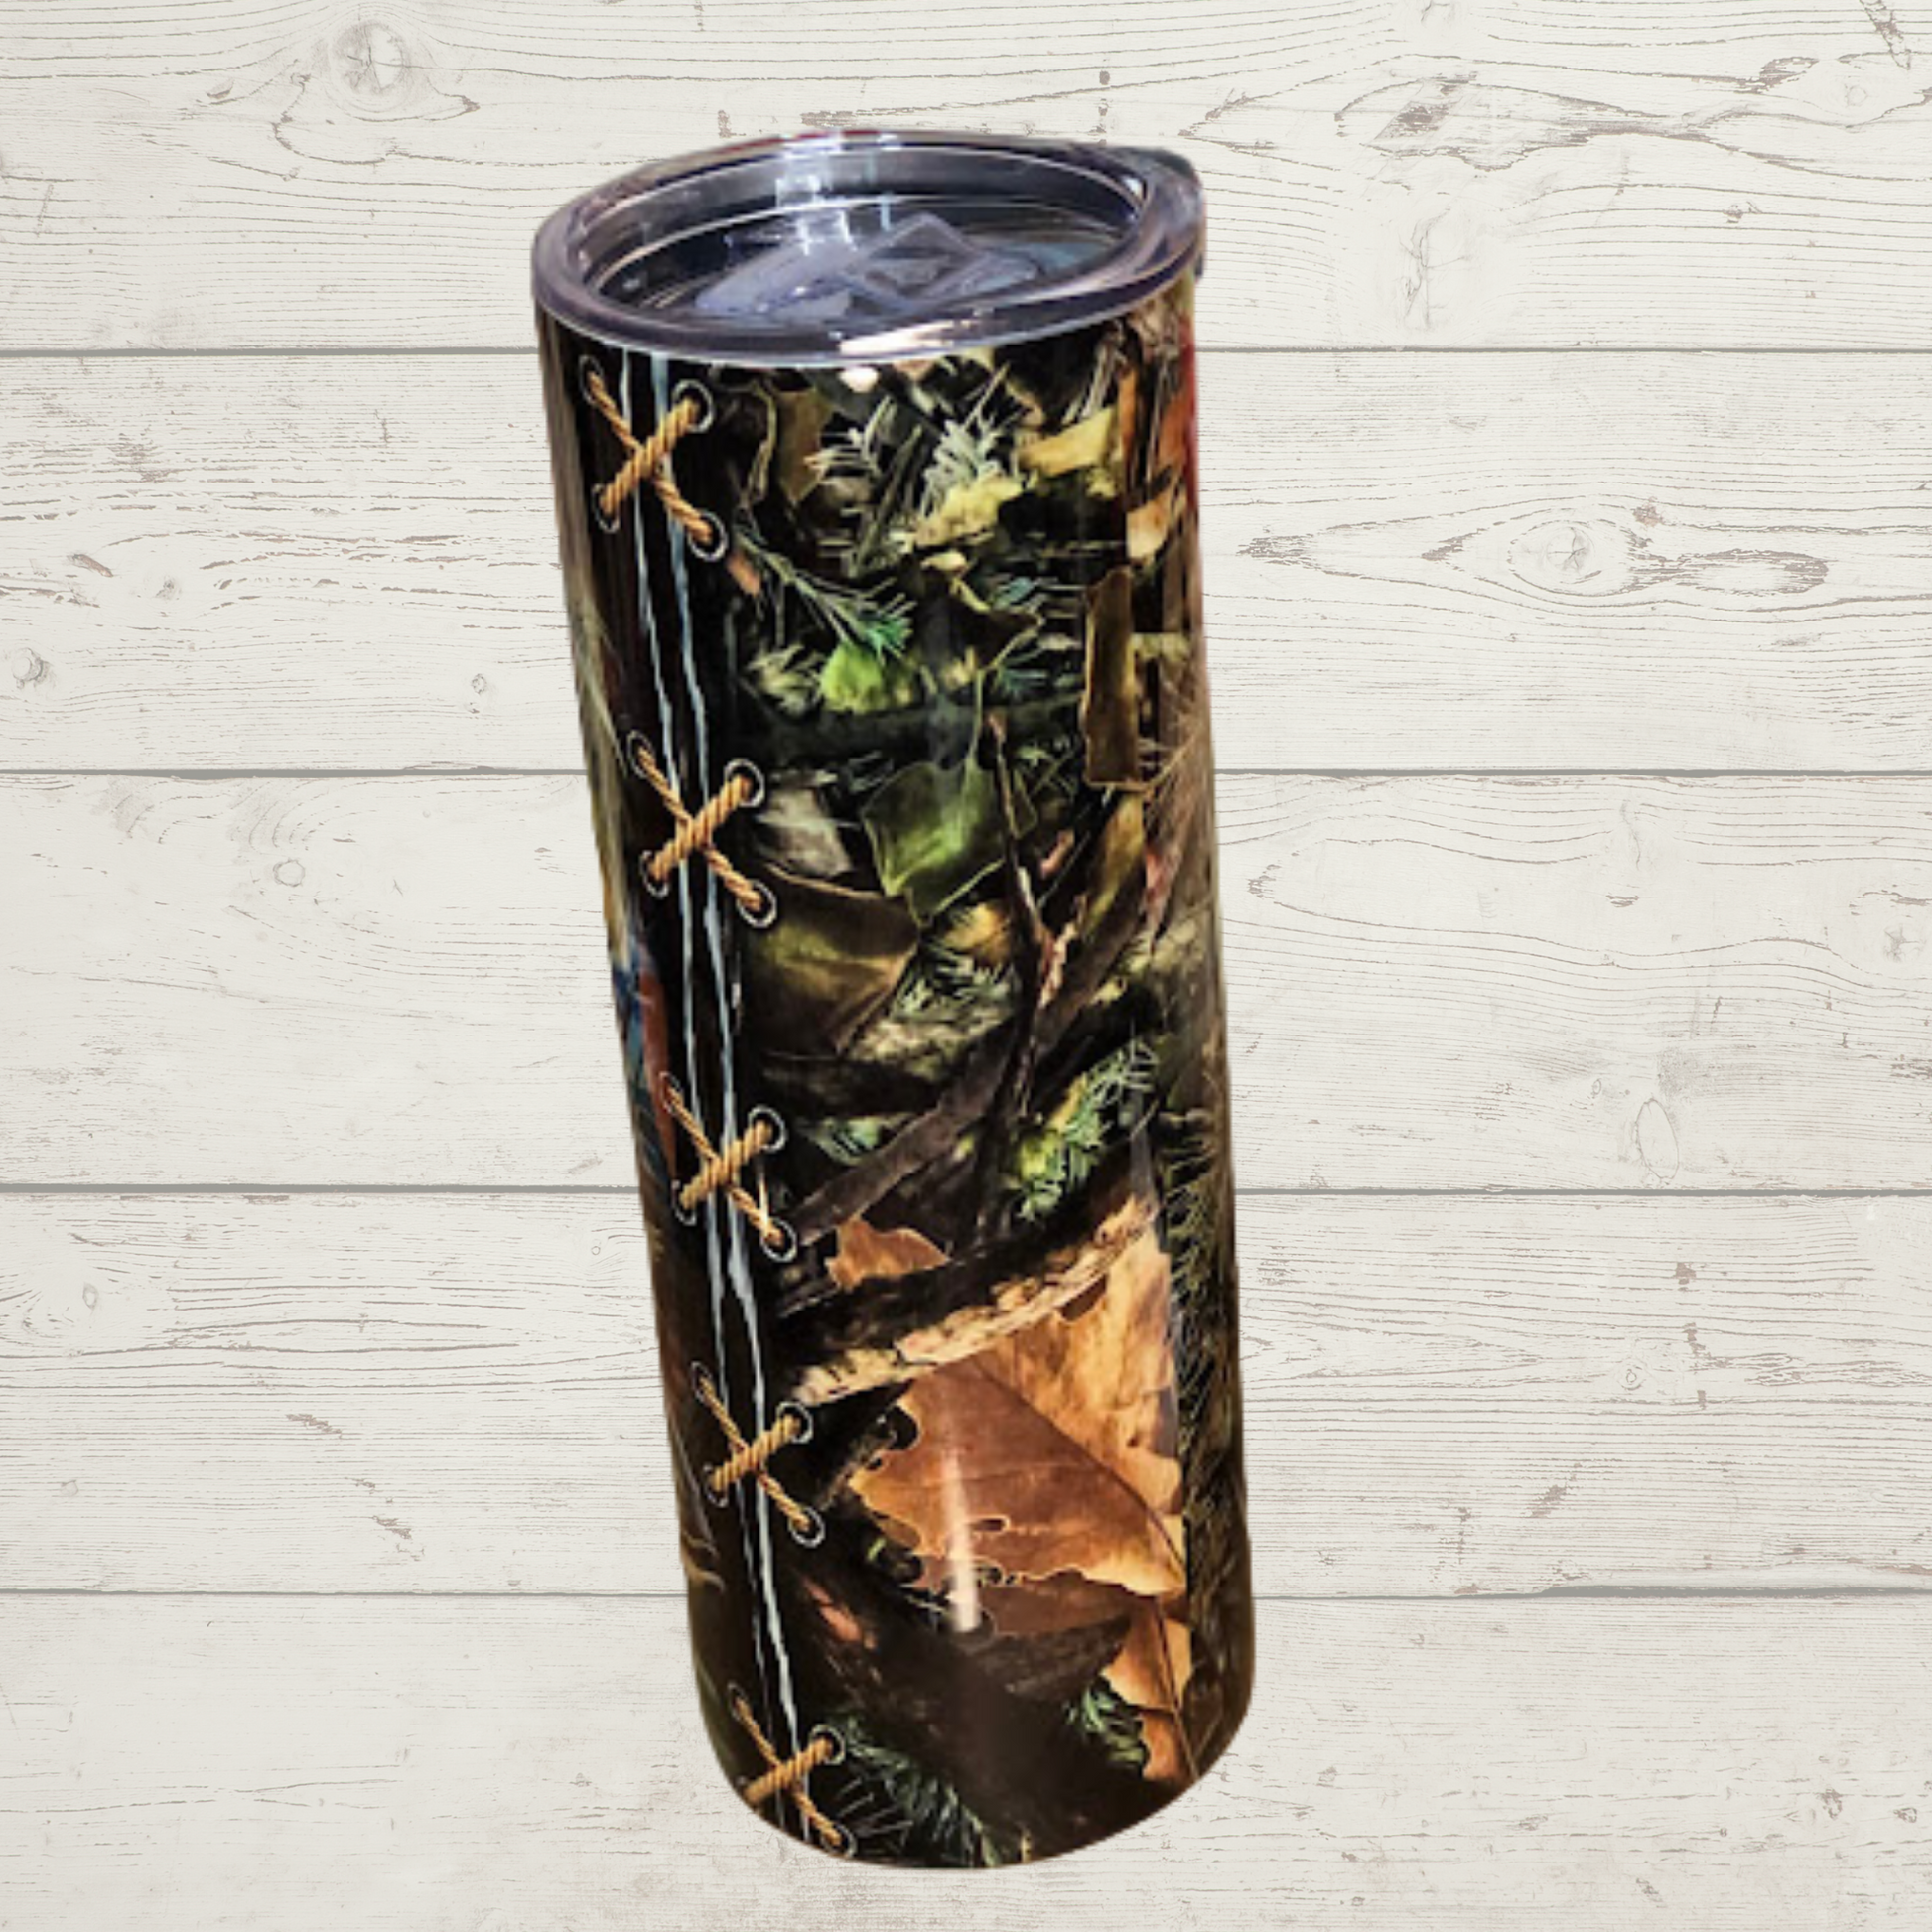 Bass/Fishing/Camoflauge 20 oz skinny sublimation tumbler vivid Detail image of several bass with one breaking through water with fisherman and boat floating on water in background